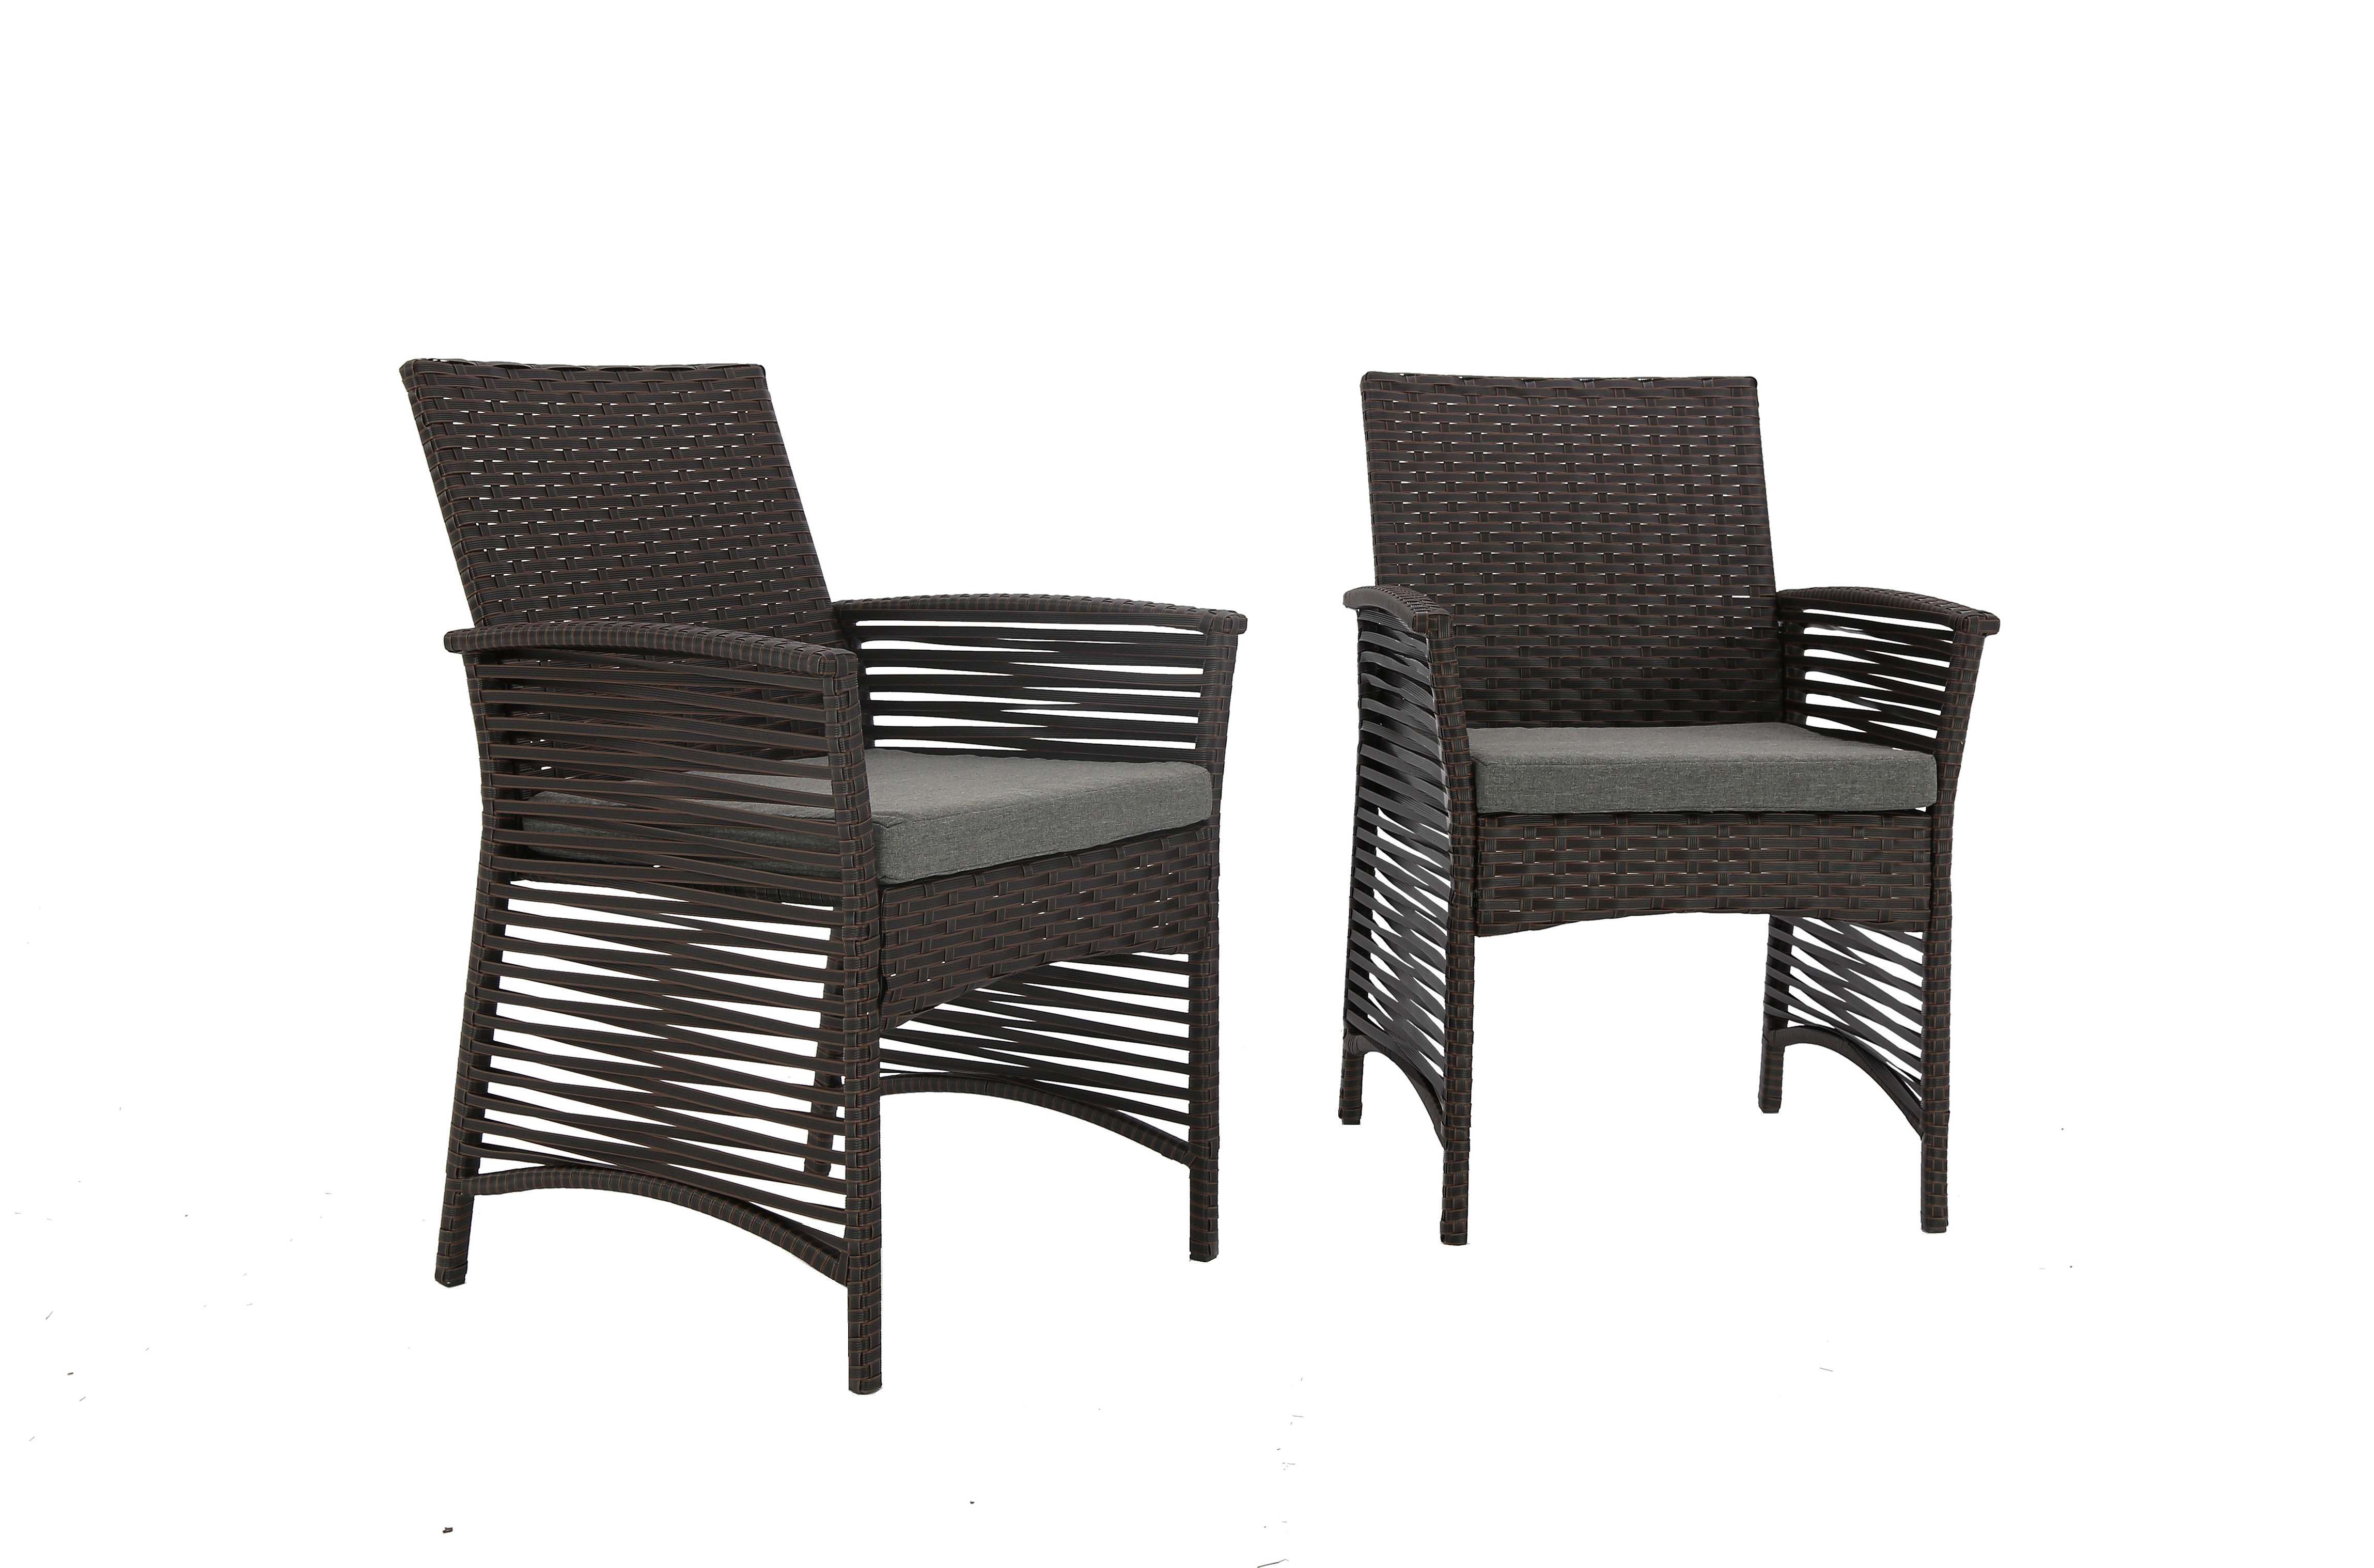 Baner Garden H13CH 3 Pieces Outdoor Patio Backyard Steel Frame Sofa Set Rattan Furniture Two Chairs and One Square Table with Cushions, Chocolate - image 4 of 5